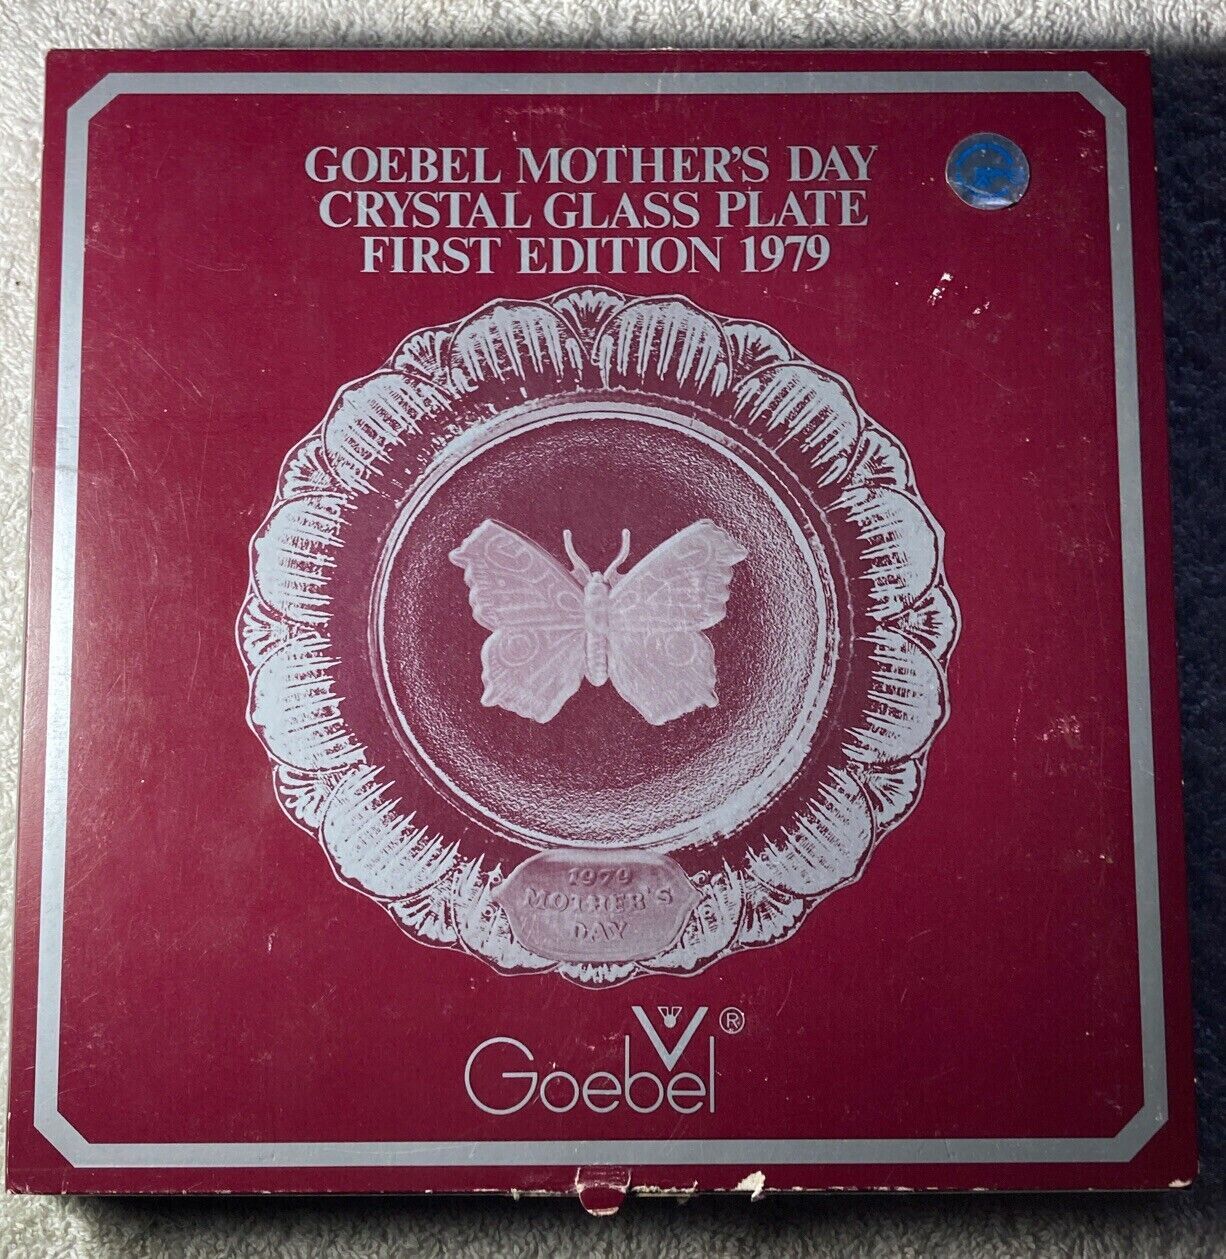 Goebel Mother's Day Crystal Glass Plate First Edition 1979 Butterfly Design - $7.66